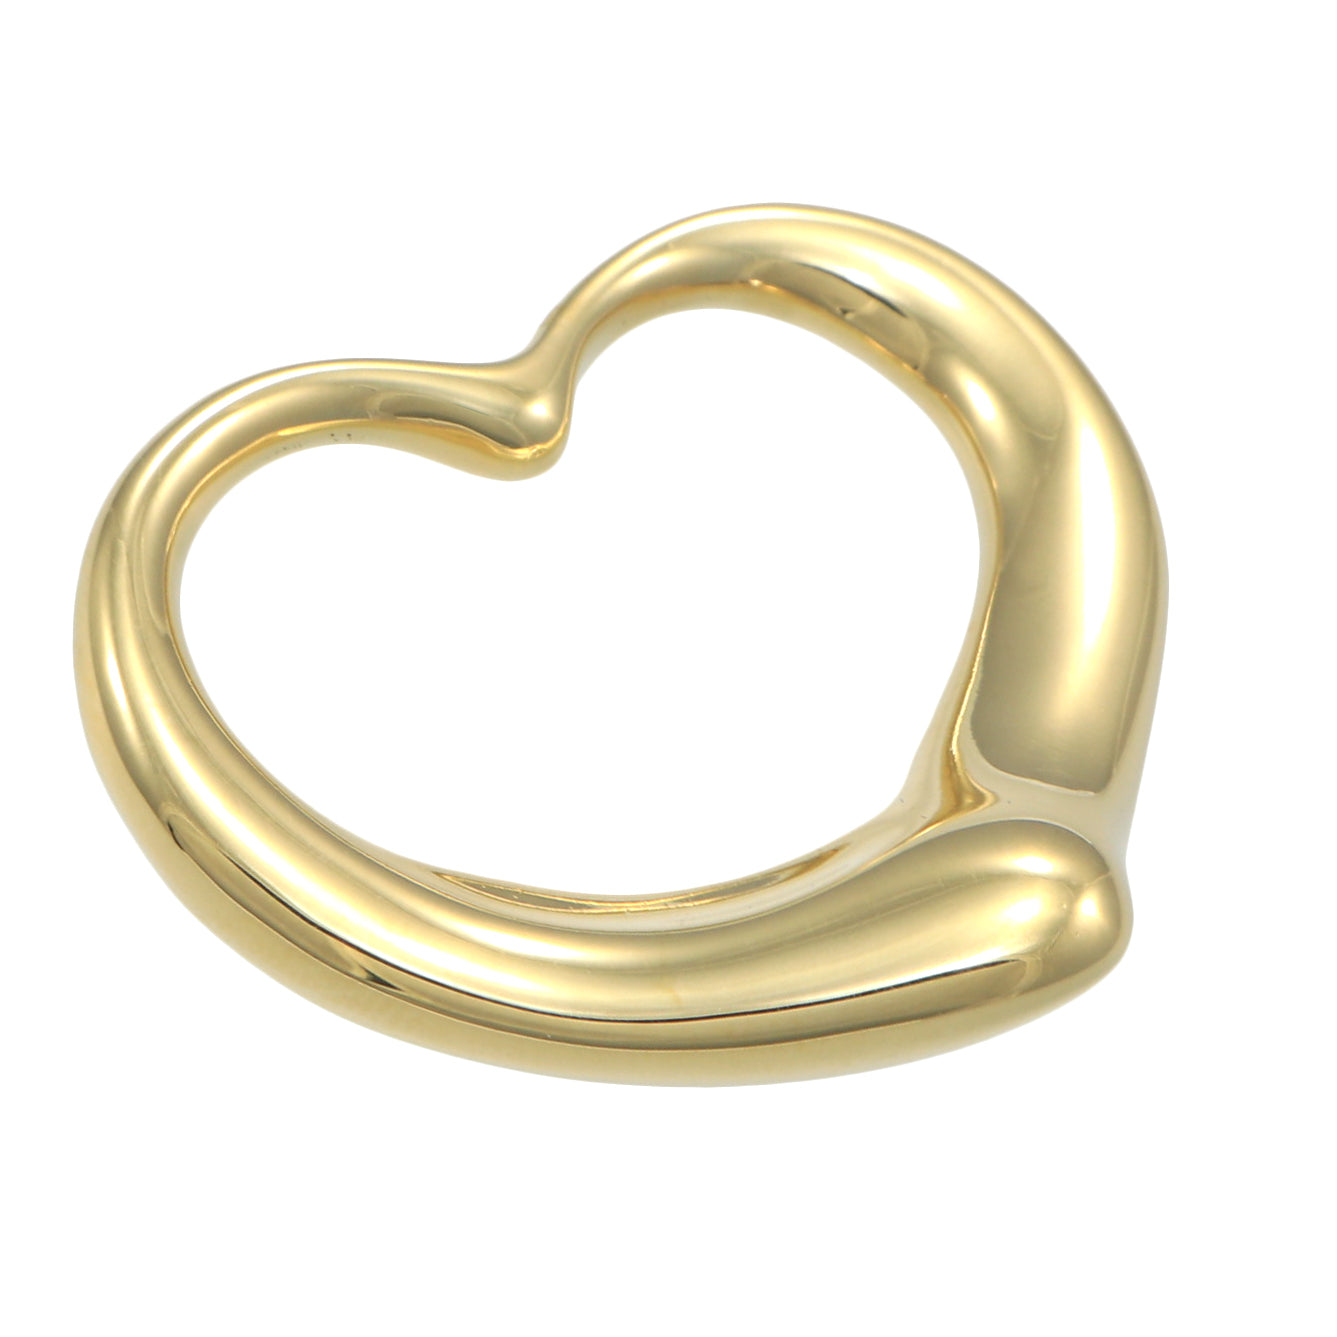 Elsa Peretti Open Heart Pendant in 18K Gold. More Sizes Available, Size: 27 mm